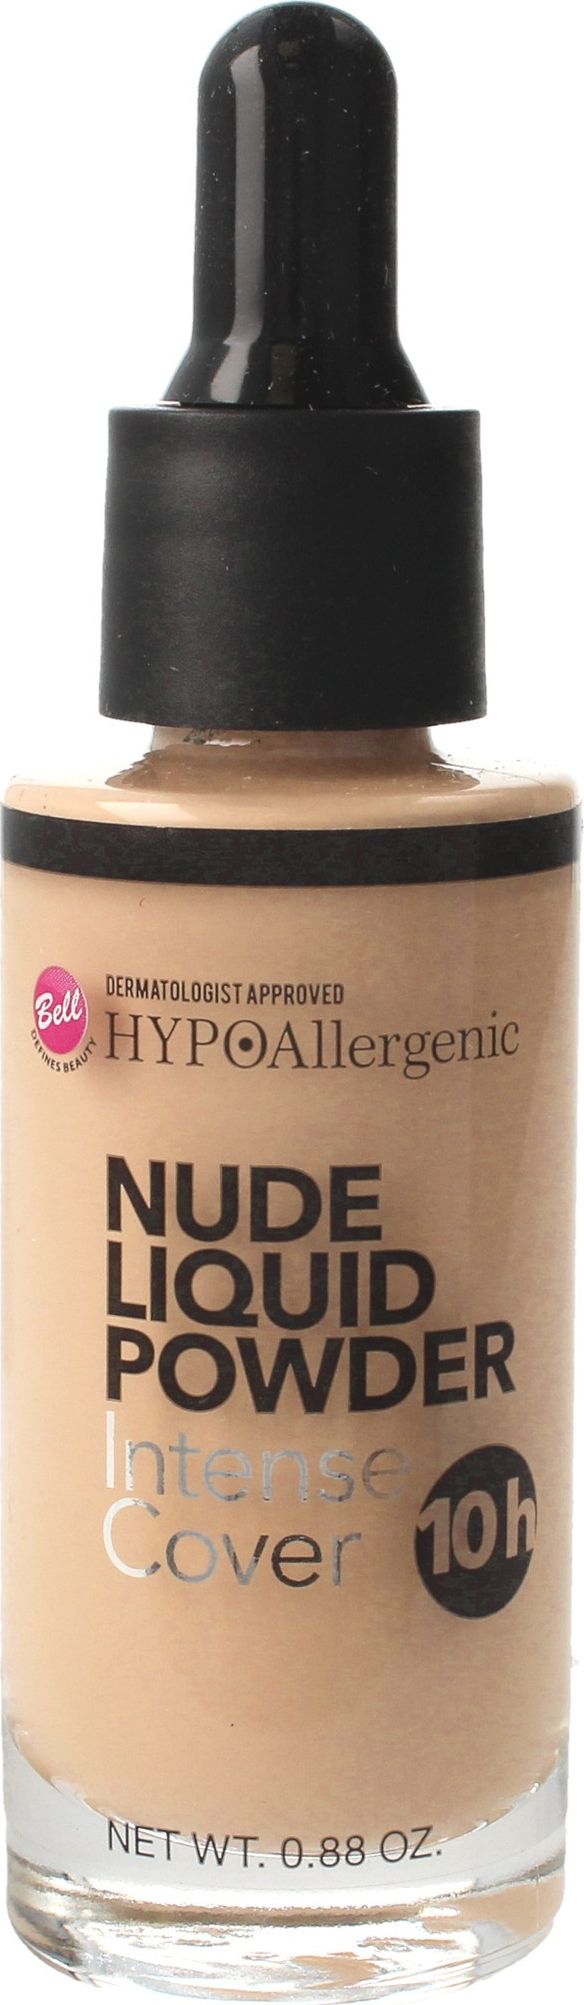 25g hipoalergenic Pulbere Lichid Lichid Pulbere Nud No. 03 Natural